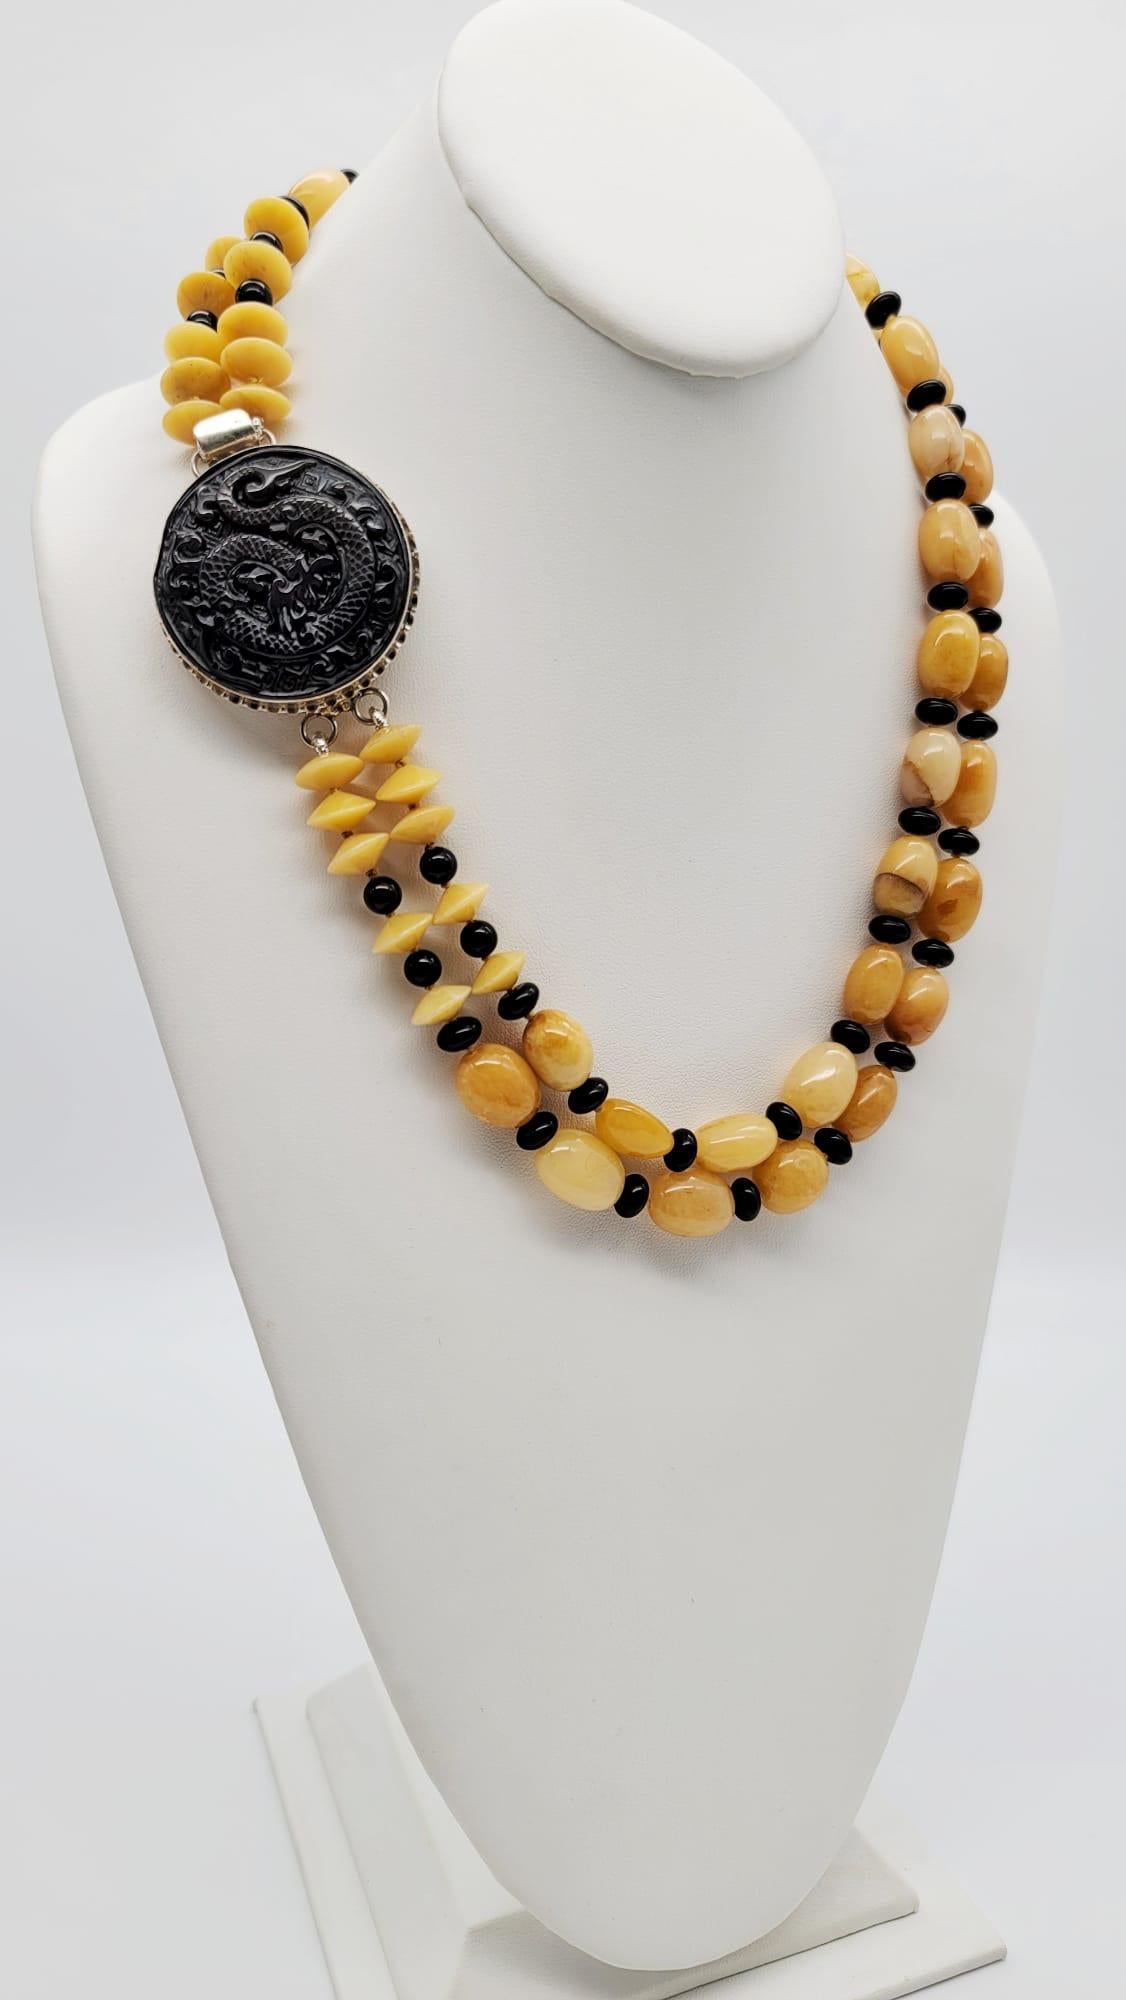 Women's A.jeschel Richly colored Honey Jade and black Onyx necklace